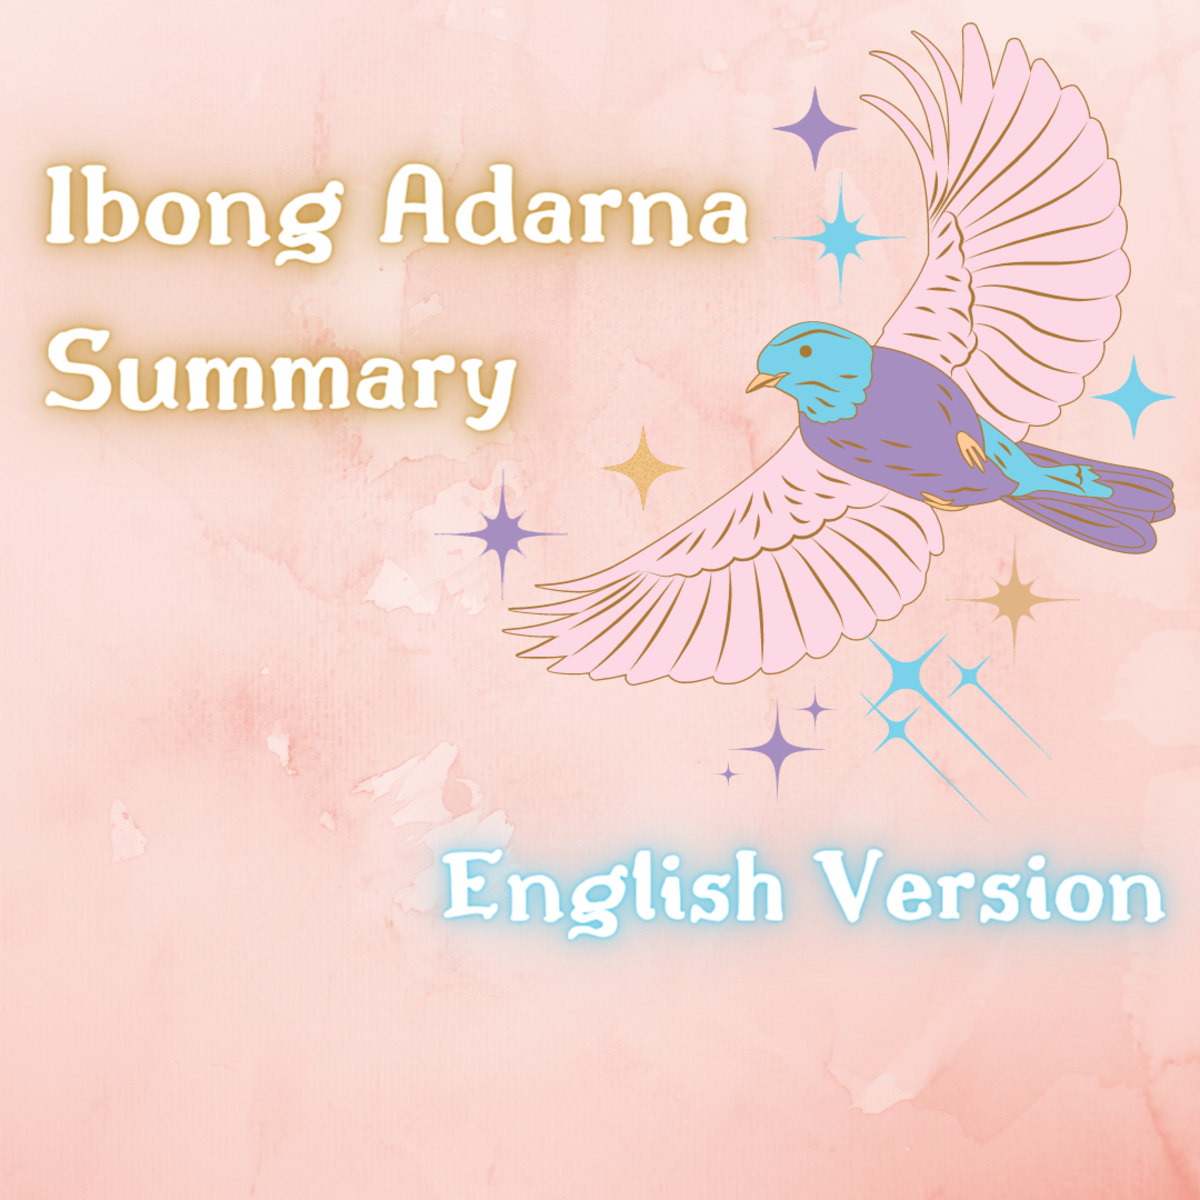 Read on to find an English summary of the Ibong Adarna, the classic Philippine folktale.